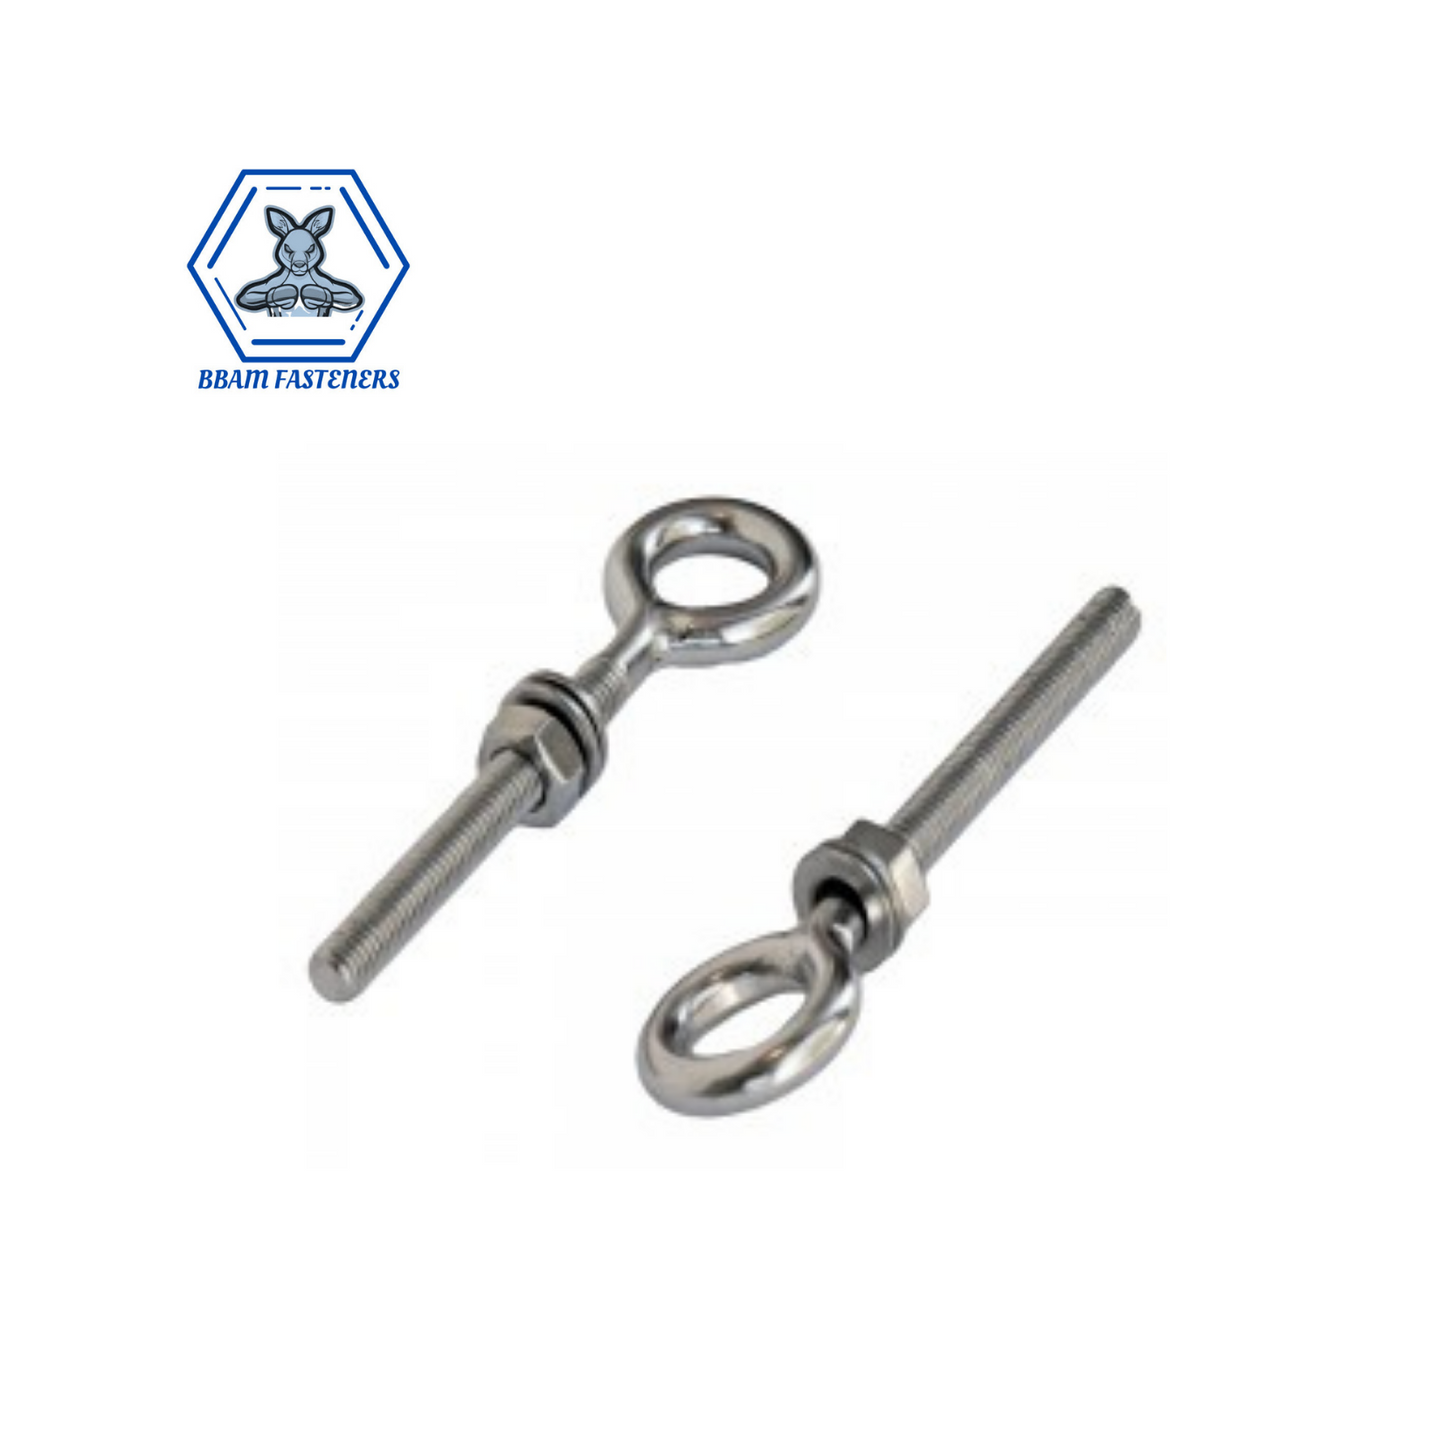 M6 x 40mm Eyebolt with Nut & Washer 304 Stainless Steel